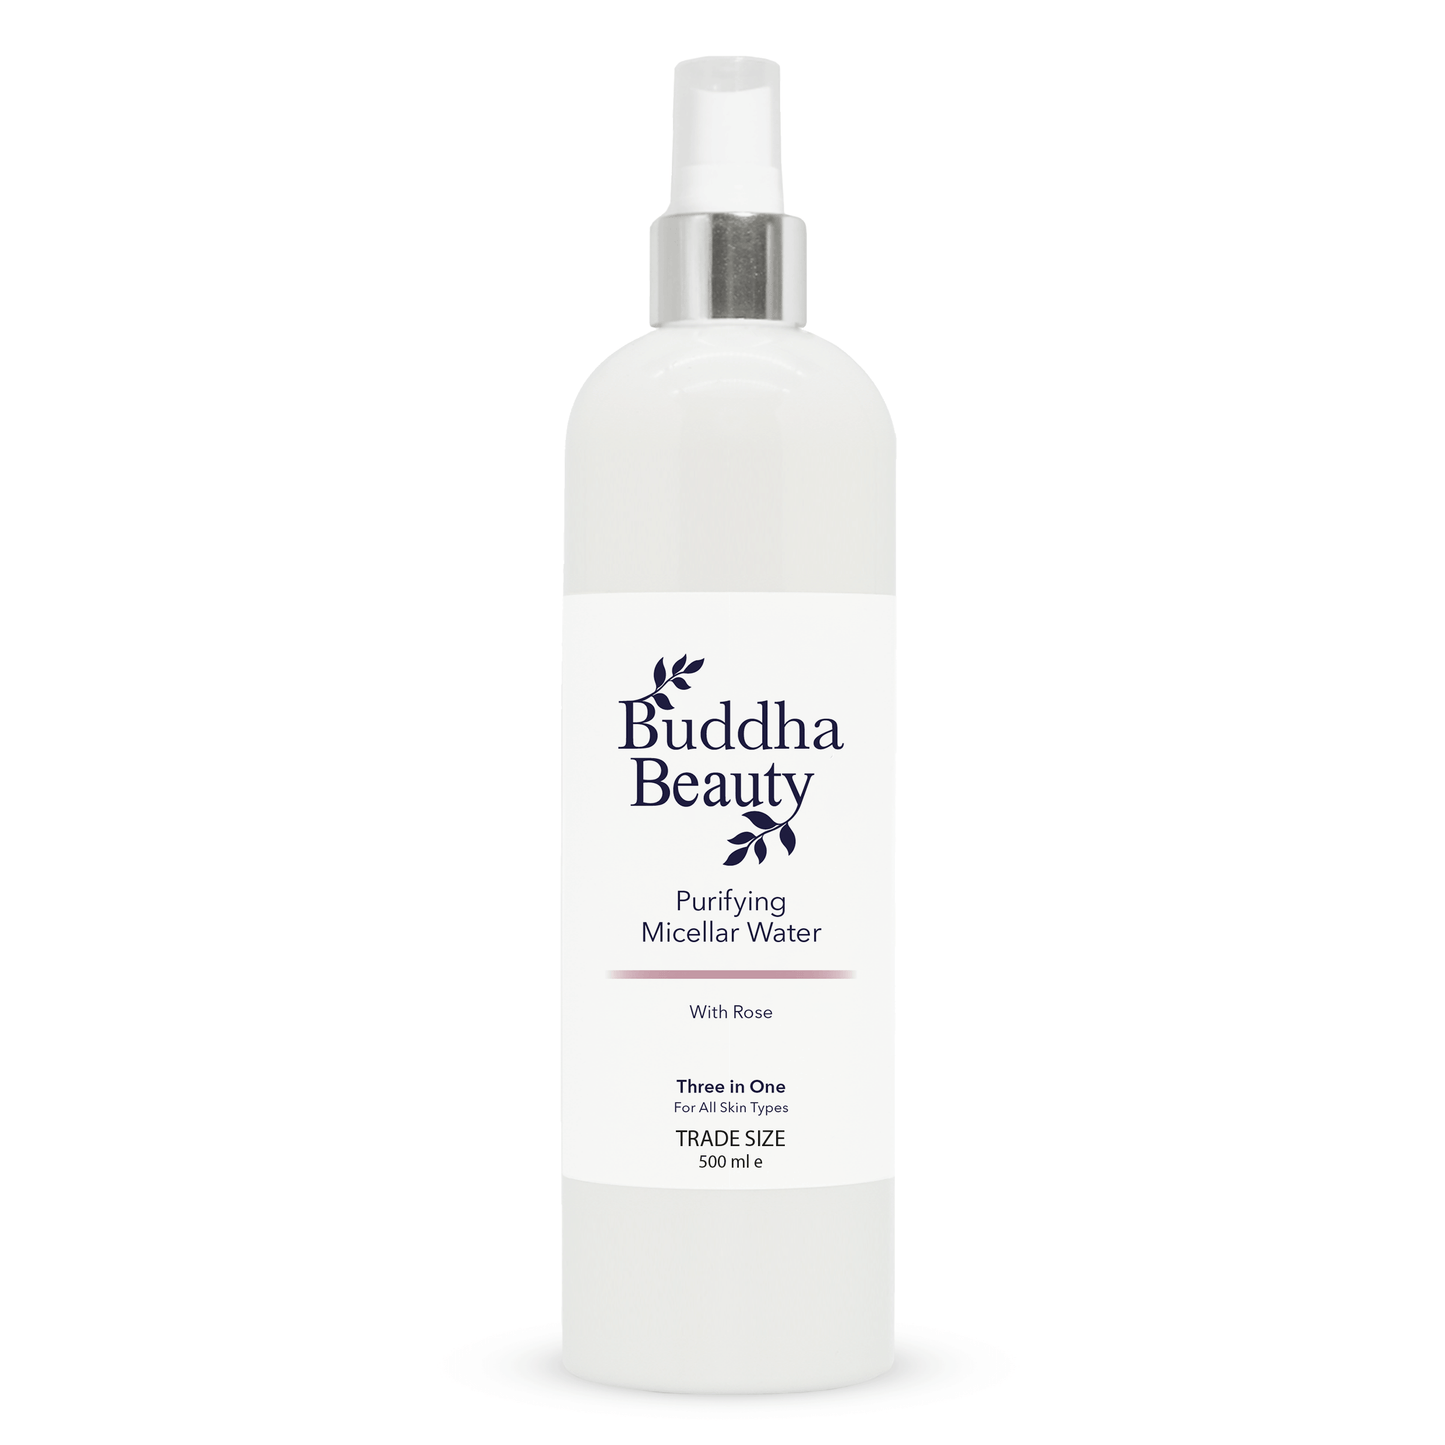 Purifying Micellar Water, All In One | Buddha Beauty Trade